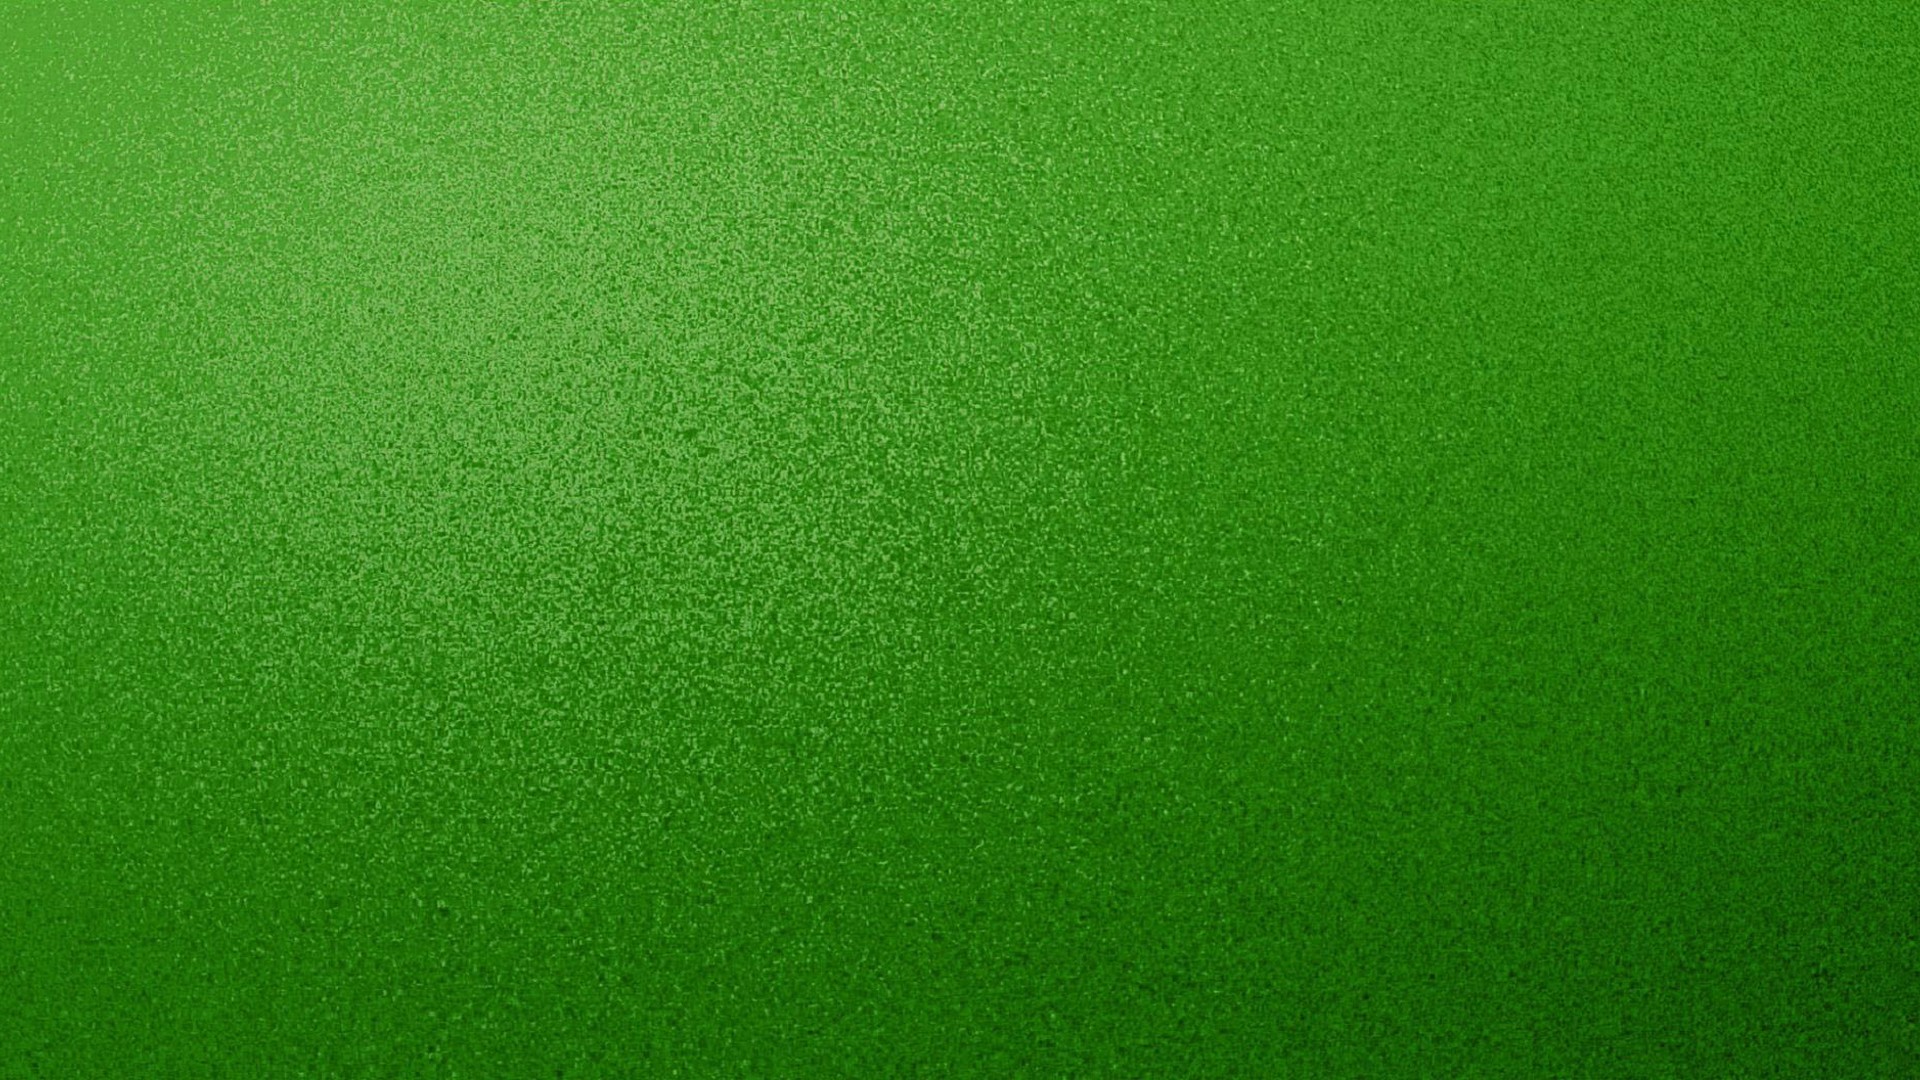 HD Wallpaper Green With Resolution 1920X1080 pixel. You can make this wallpaper for your Desktop Computer Backgrounds, Mac Wallpapers, Android Lock screen or iPhone Screensavers